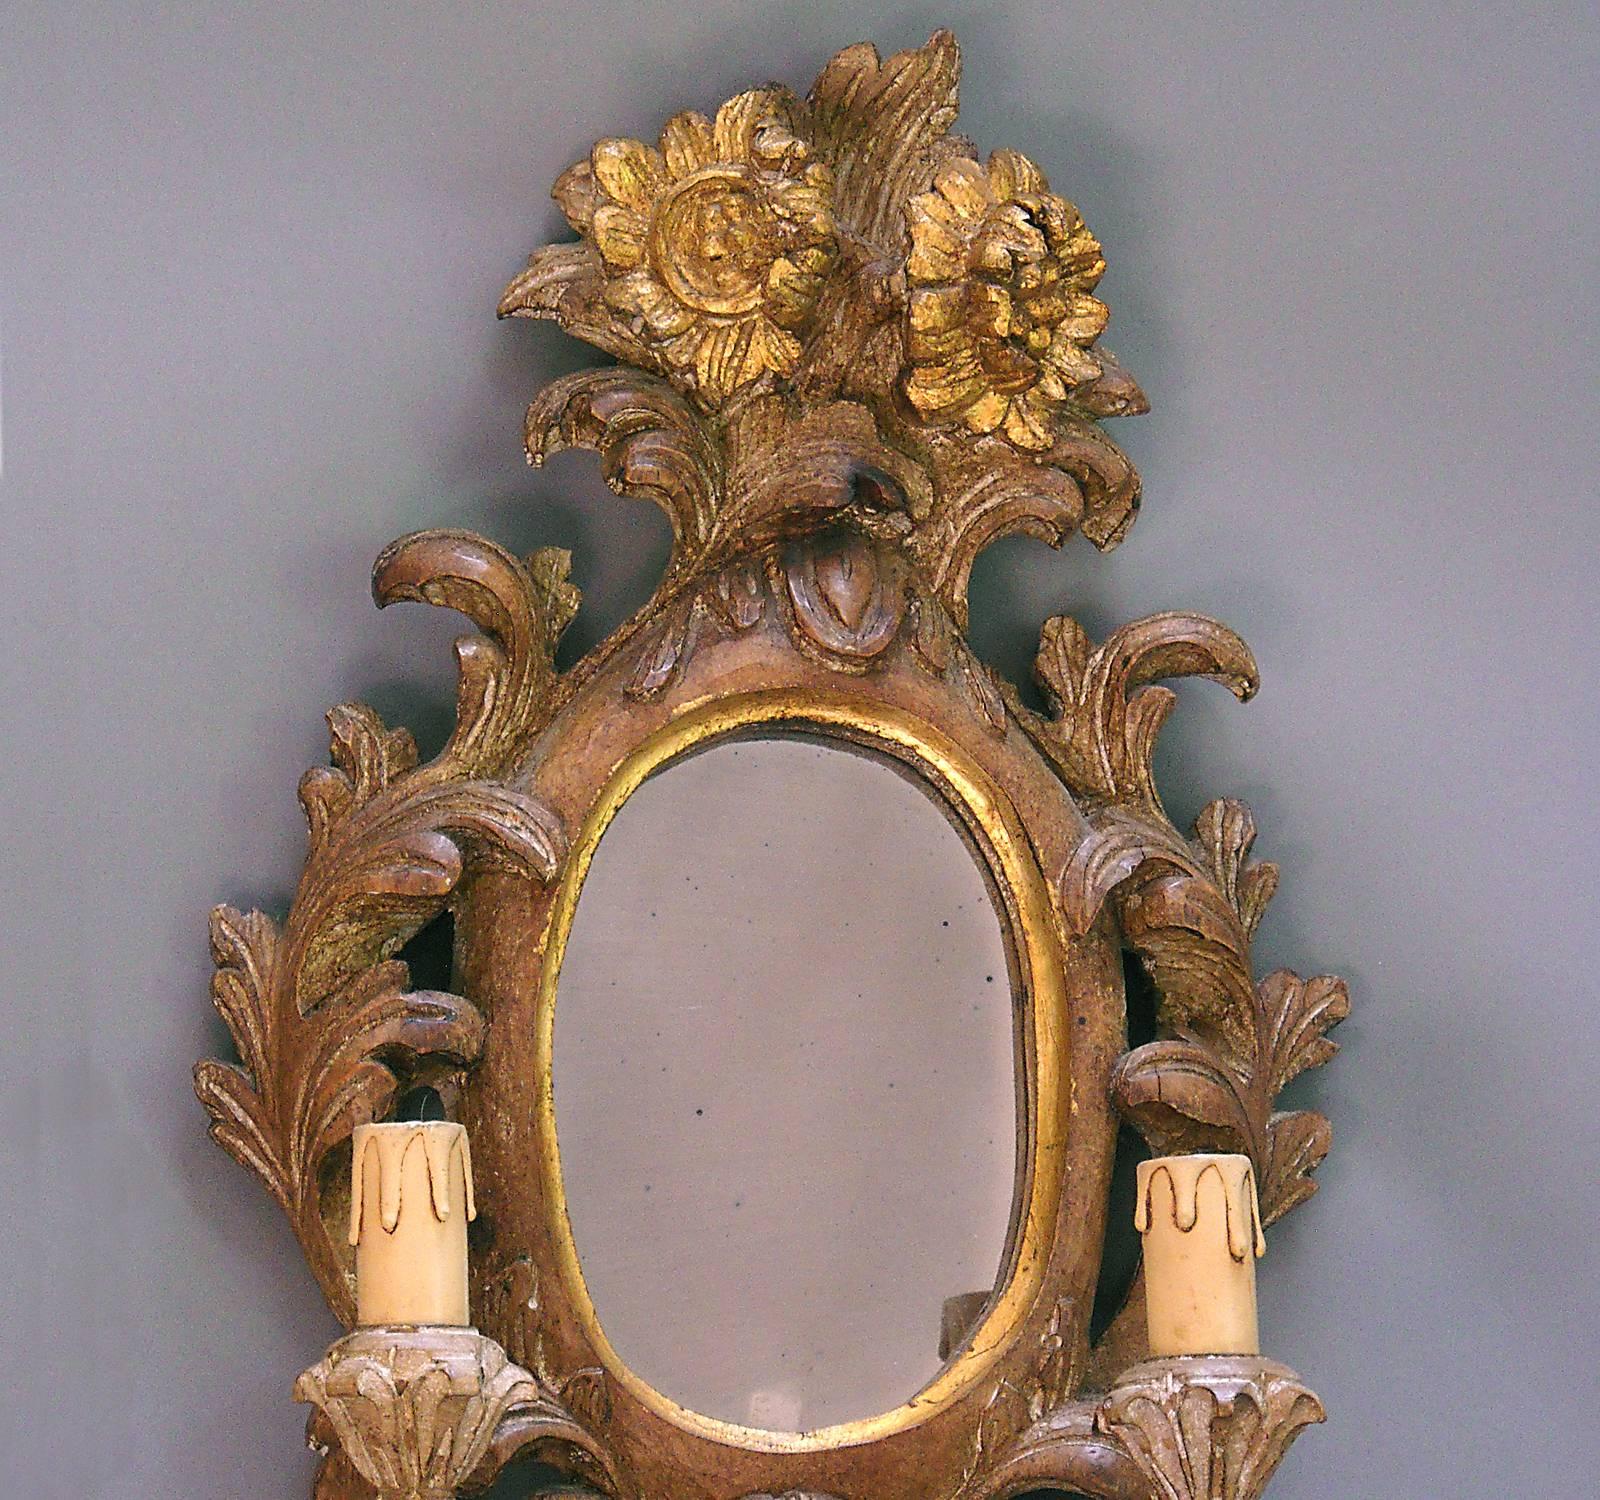 Carved wood and composition Danish sconce in the Rococo style with mirror and two candle holders. Highly decorative with blossom and fruit details.